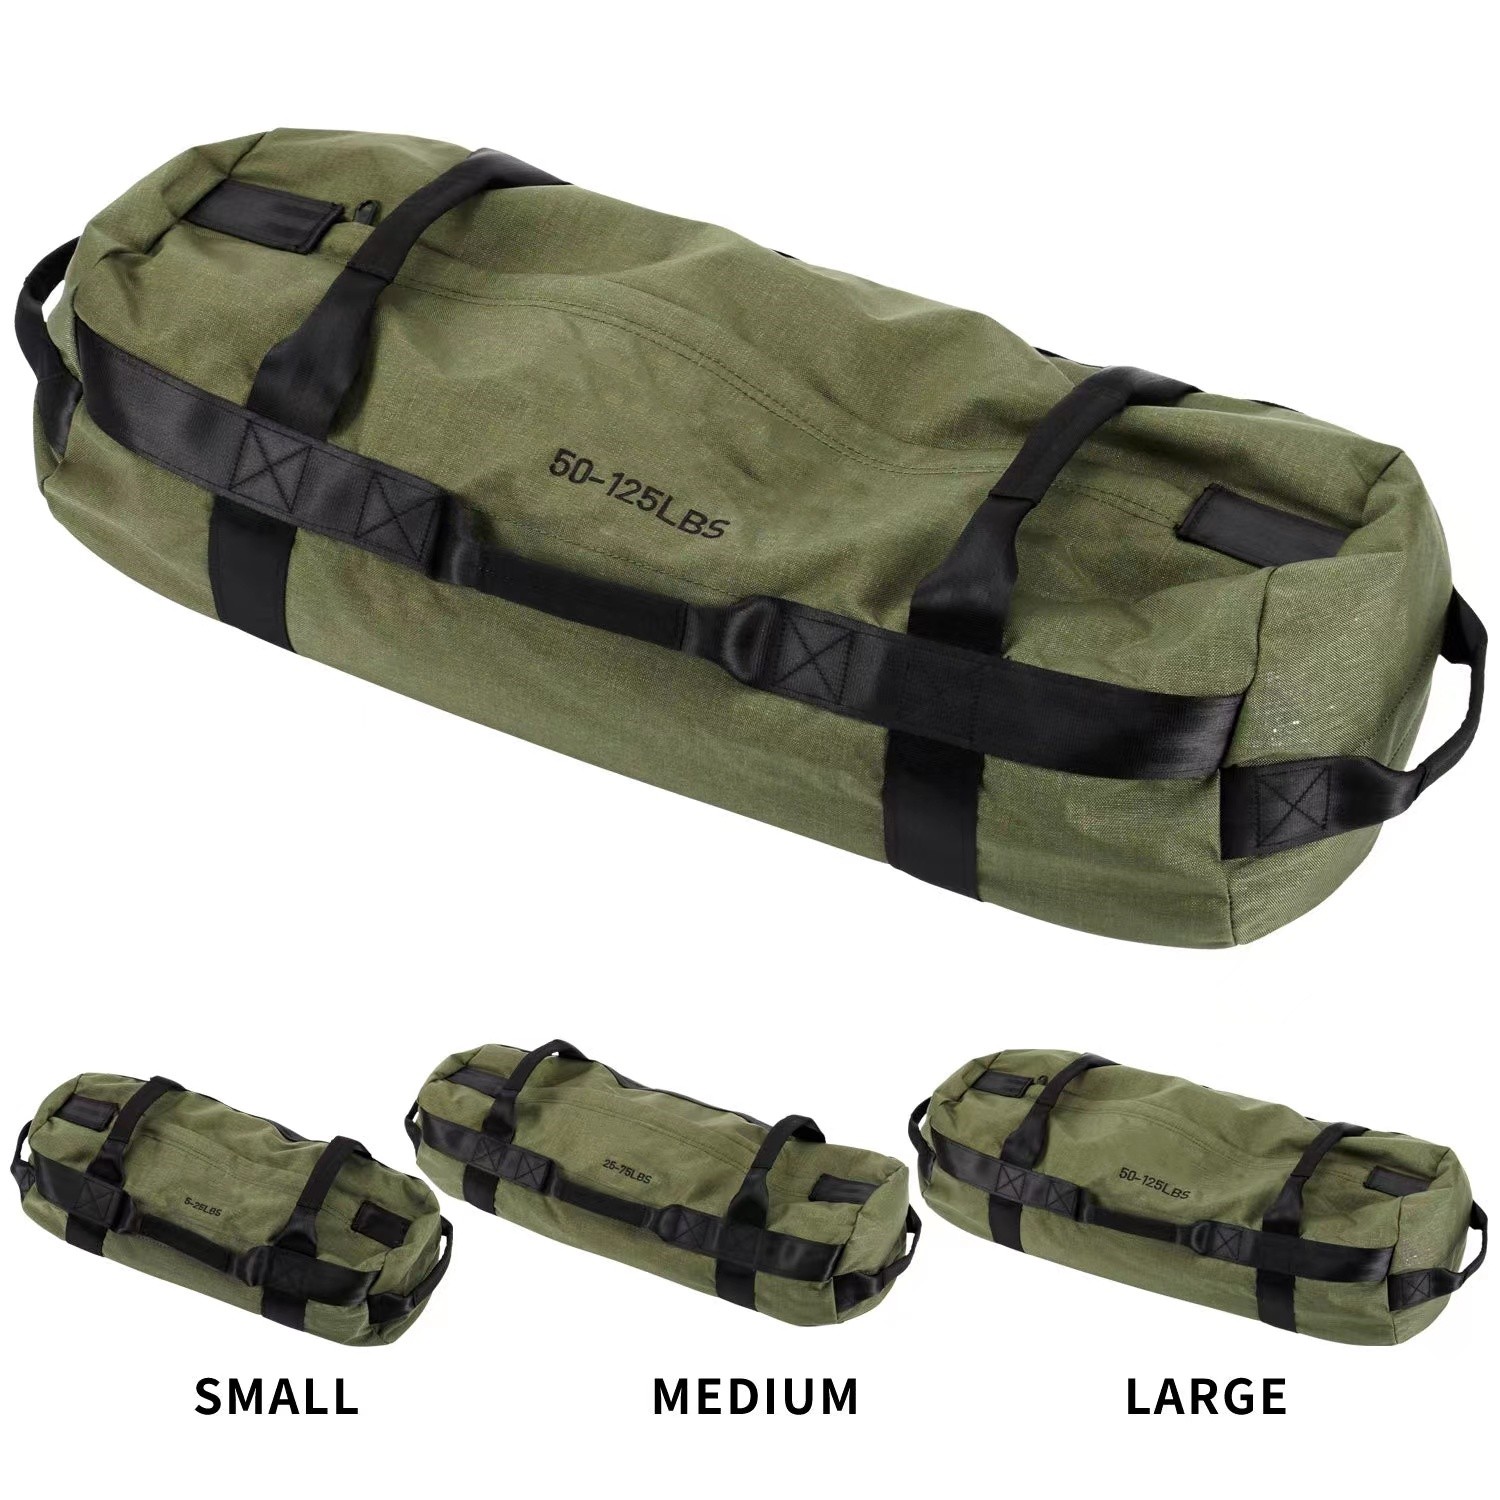 Workout Sandbag for Heavy Duty Workout Cross Training 7 Multi-positional Handles, Army Green 